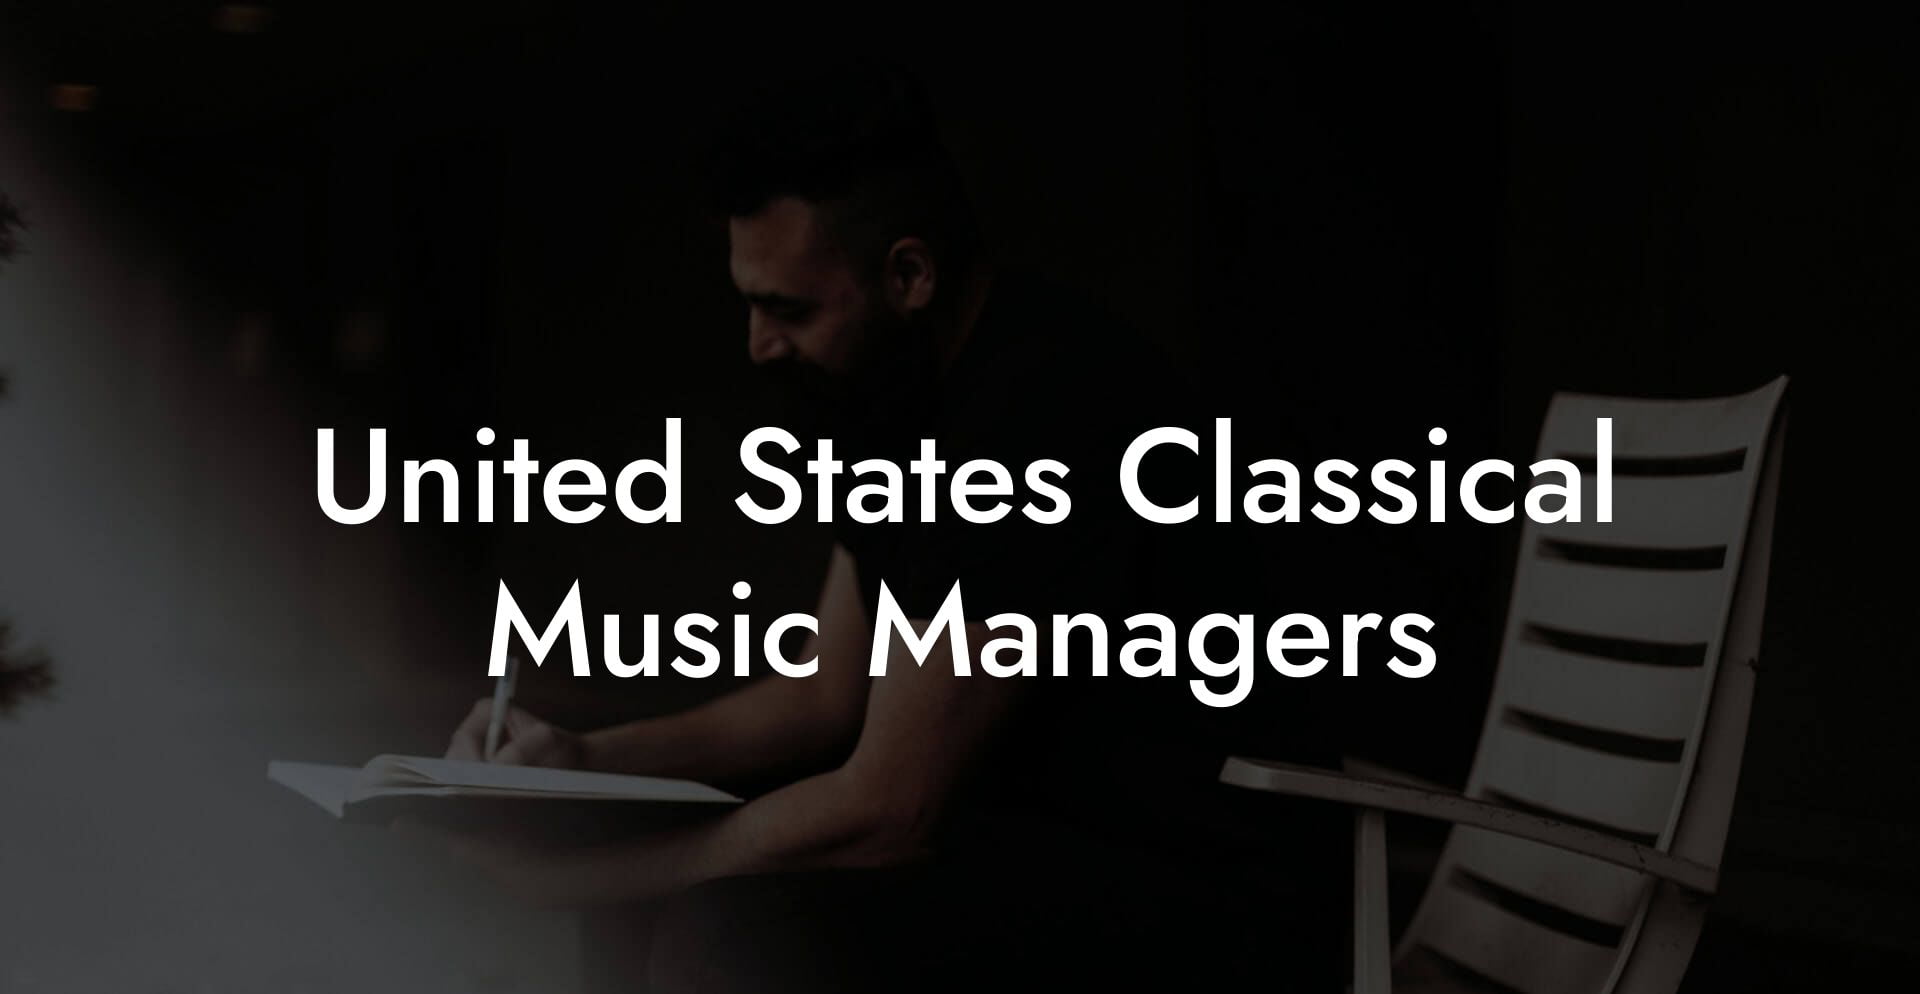 United States Classical Music Managers